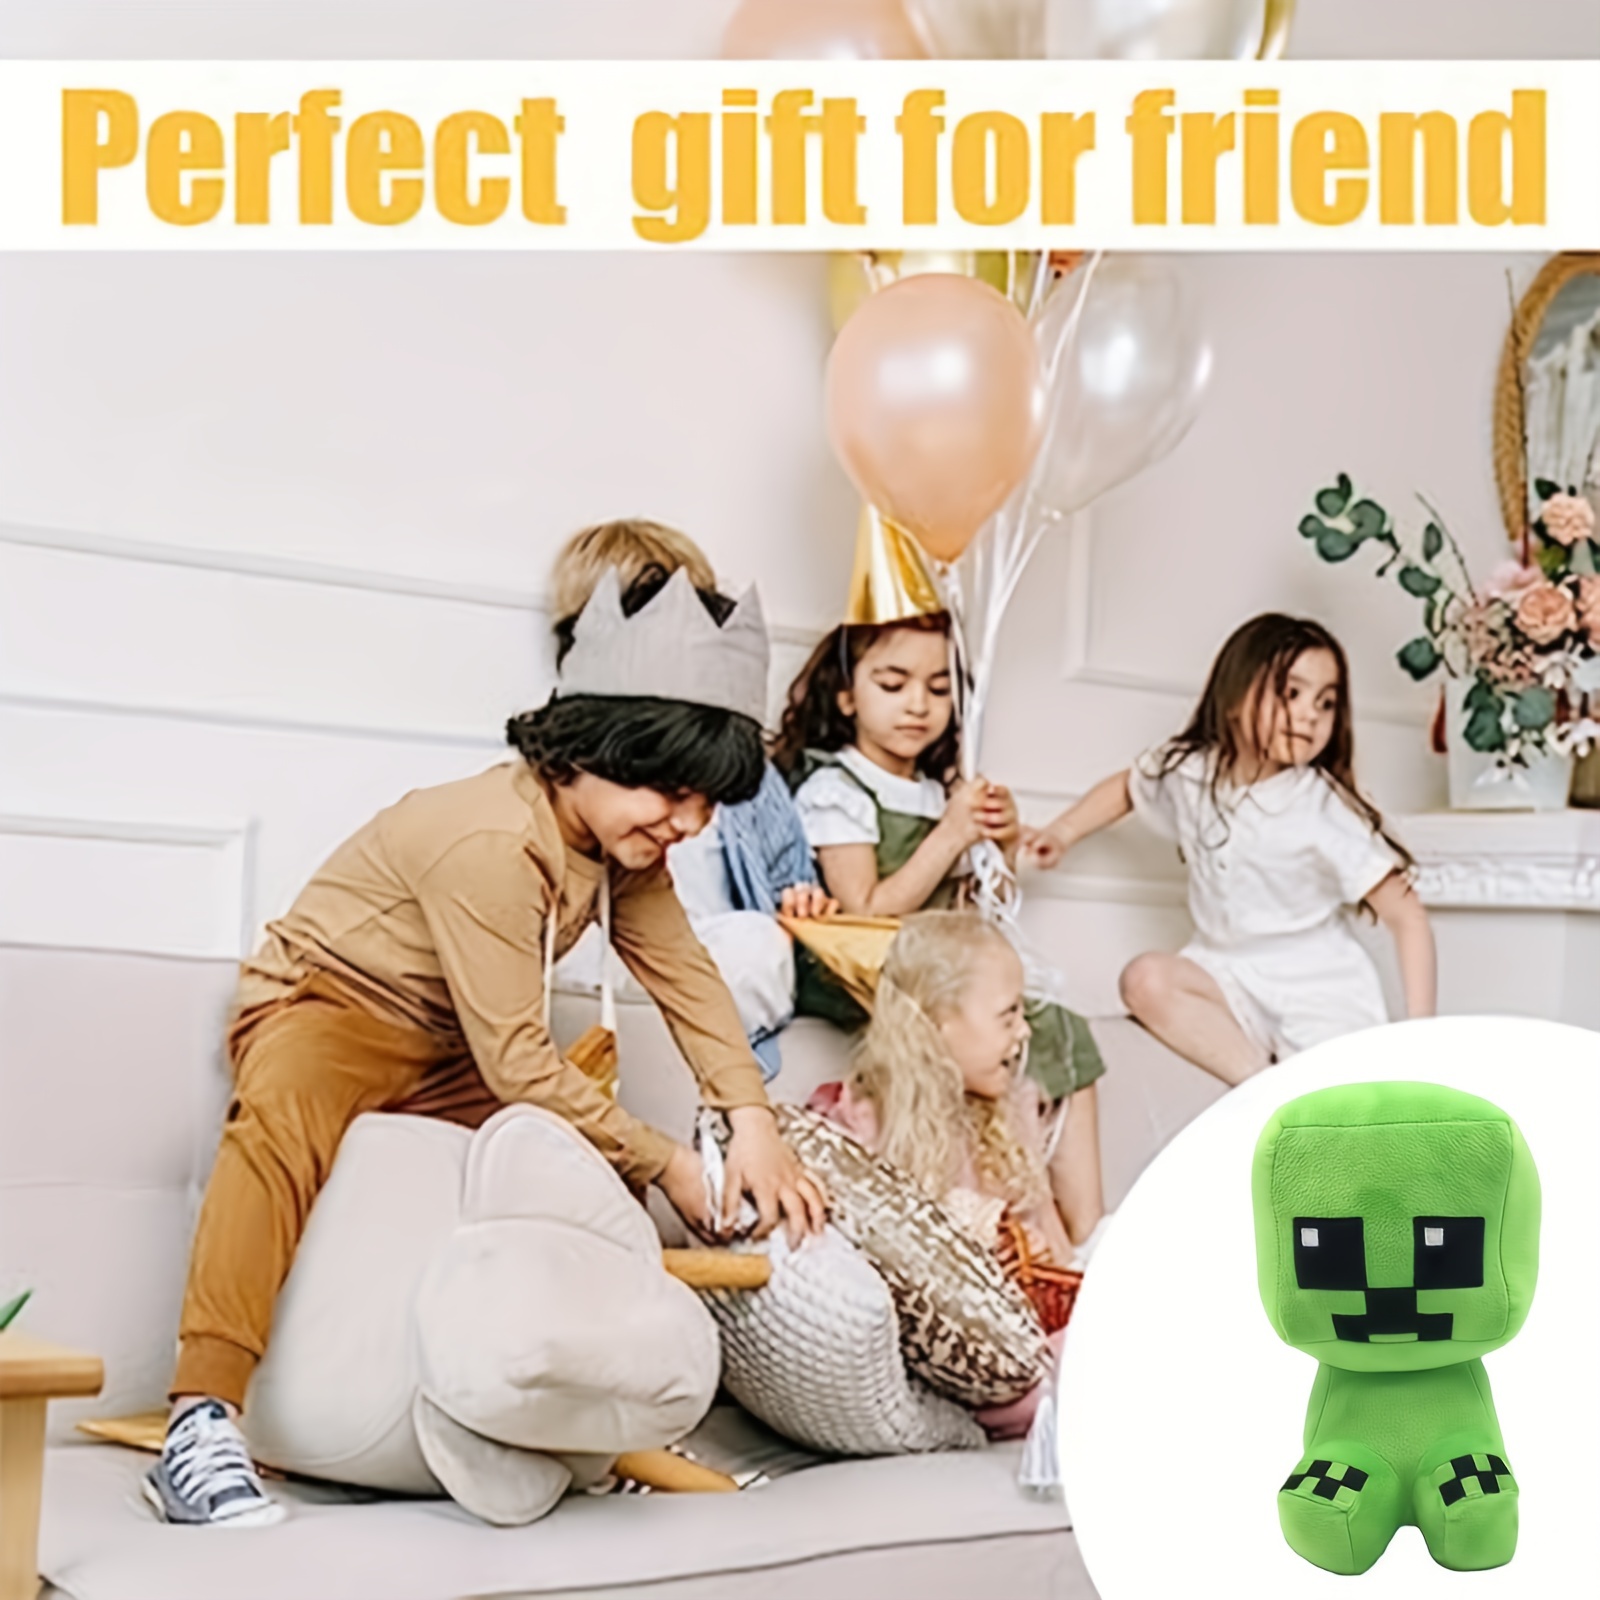 Minecraft Basic Plush Creeper Stuffed Animal, 8-inch Soft Doll Inspired by  Video Game Character